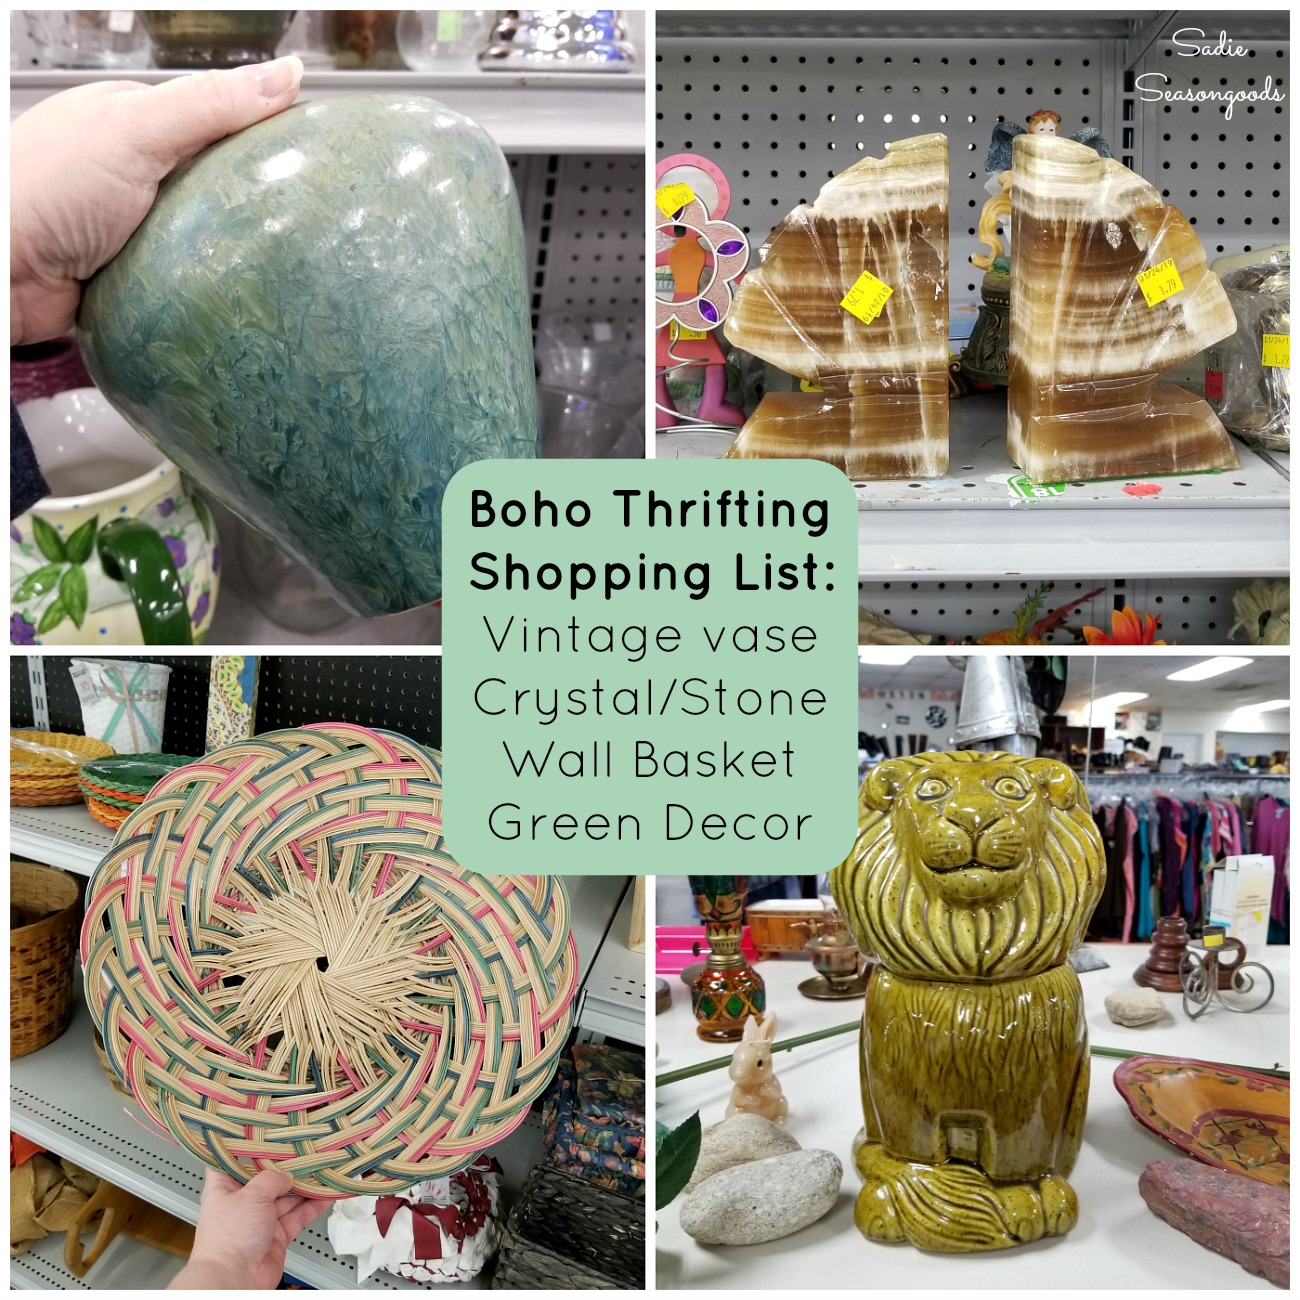 Thrift Store finds for boho room decor and bohemian style decor